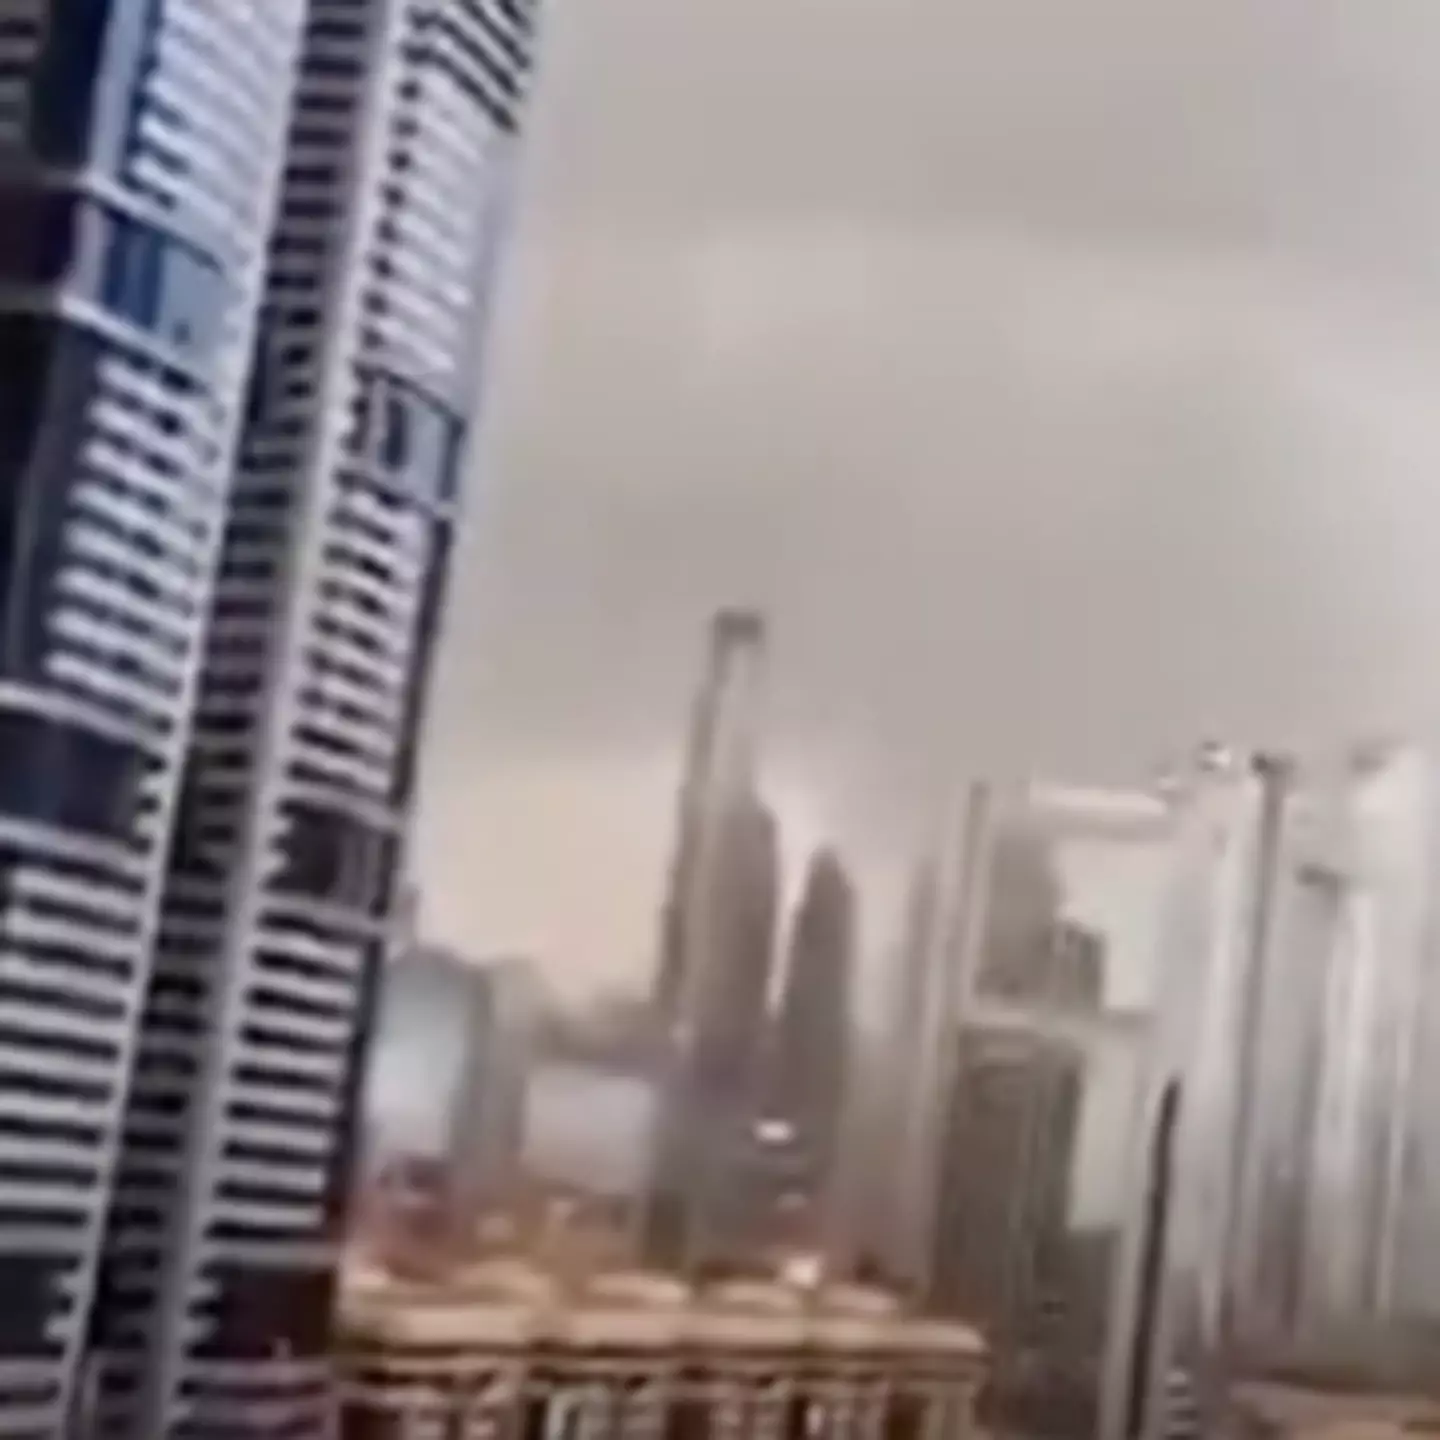 Incredible footage shows Dubai's artificial rain that's used to tackle high temperatures